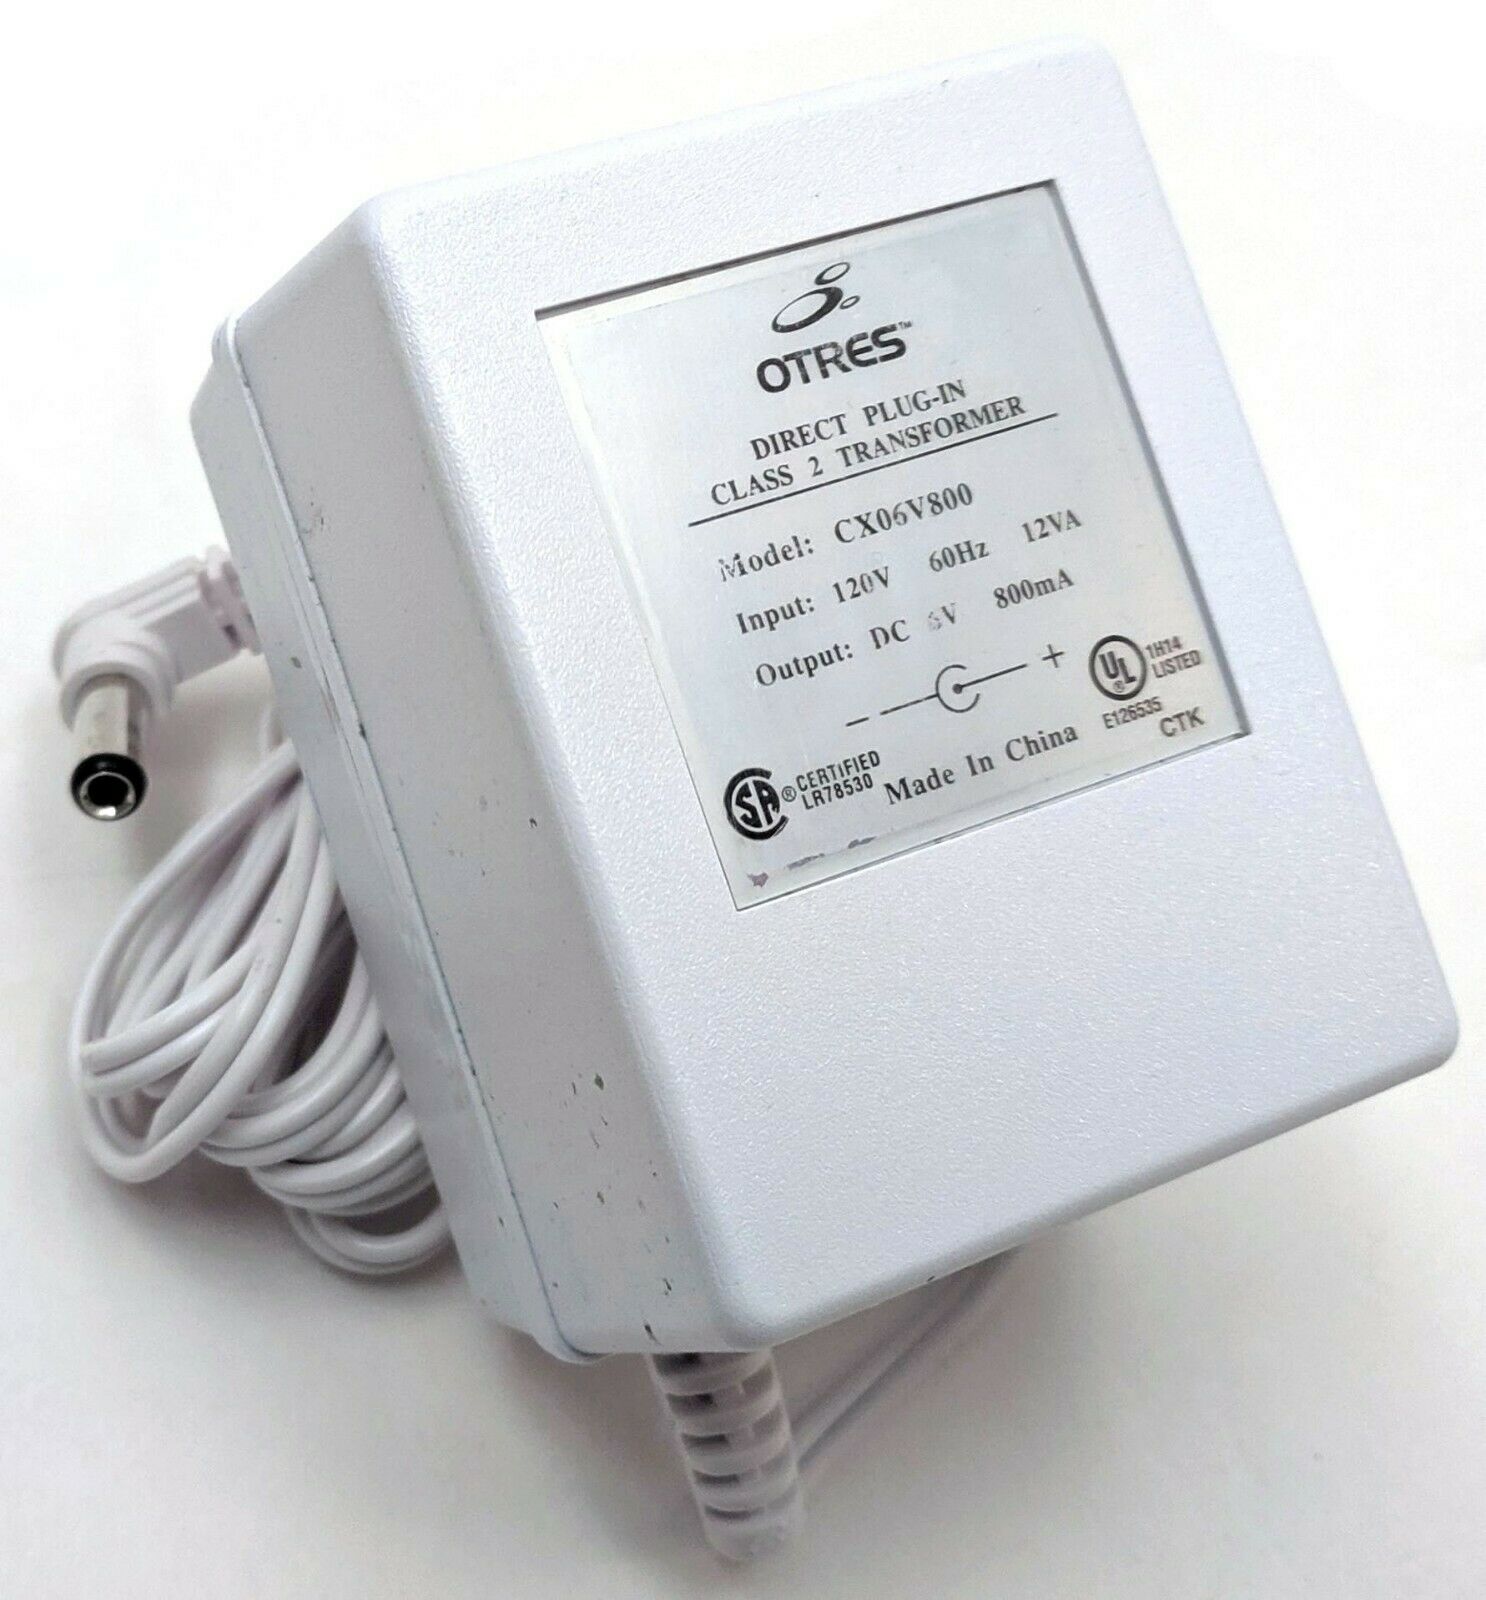 NEW OTRES AC-DC Adapter 6VOLTS DC @ 800mA 2.5mm DC Power Plug - White 5.5mm Country/Region of Manufacture: China Custo